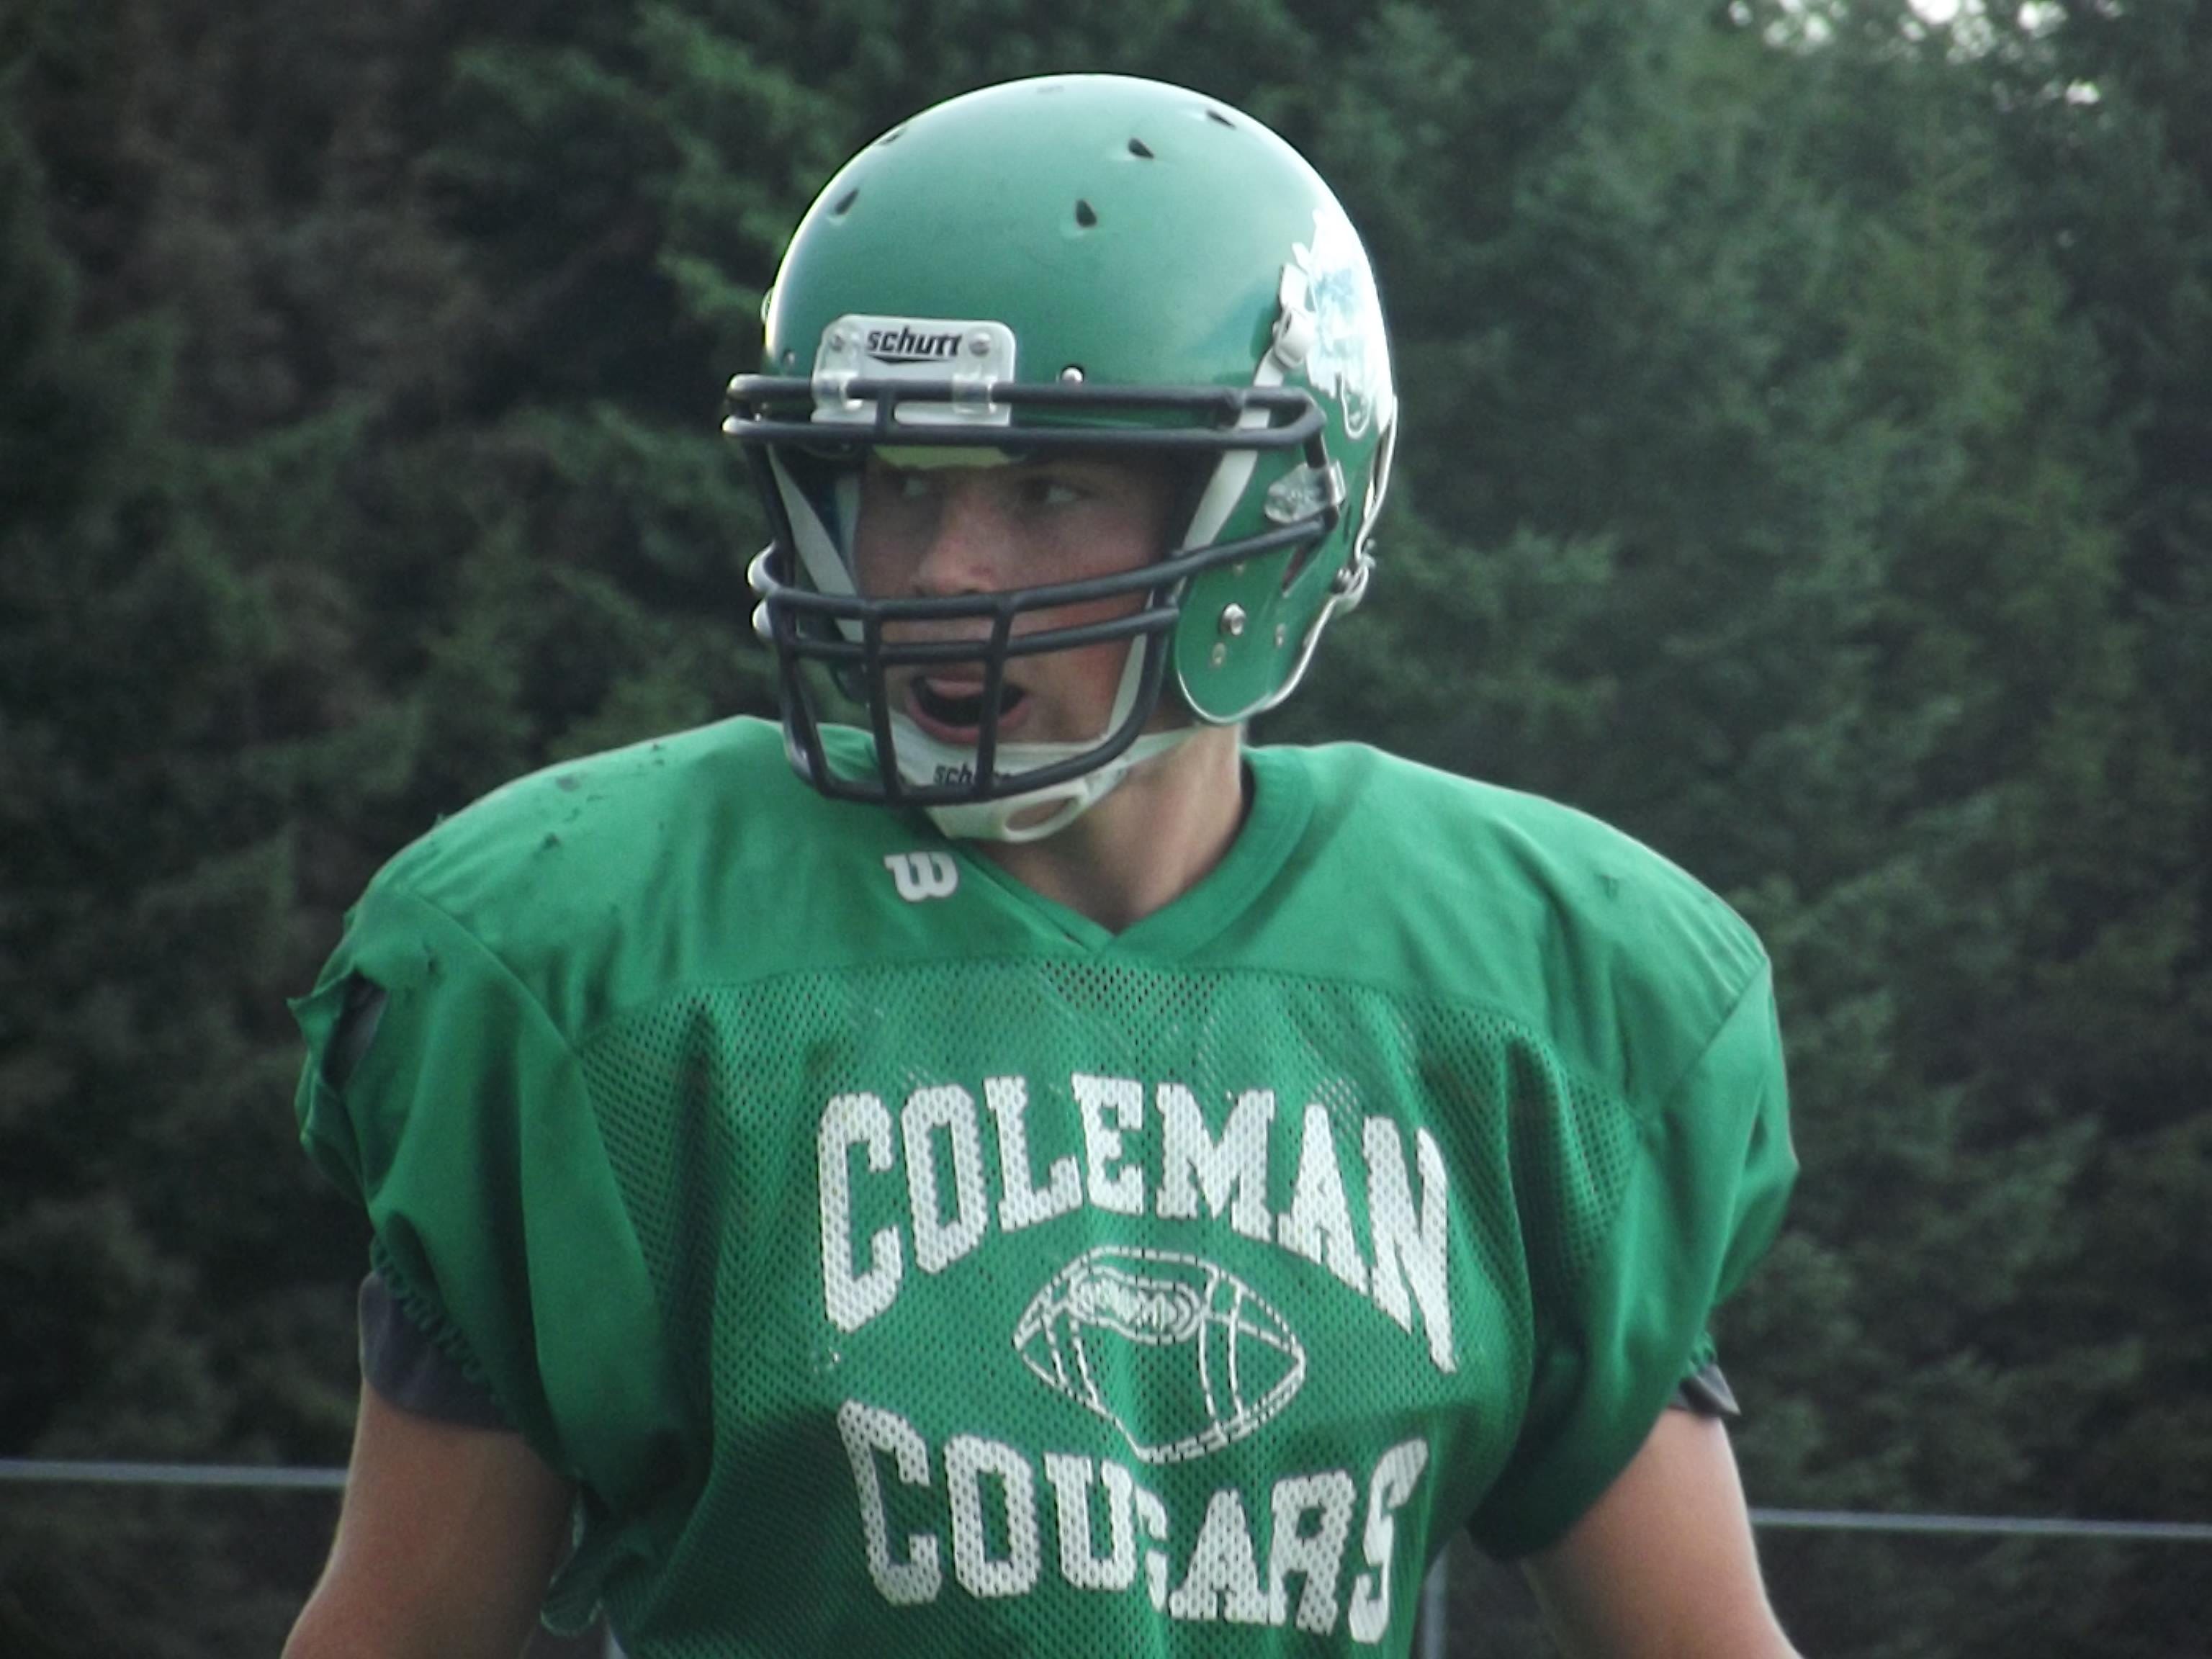 Coleman senior Blake Margis gets set to line up on defense during a scrimmage Friday at Algoma. The Cougars are trying to repeat as M&O Conference champions.